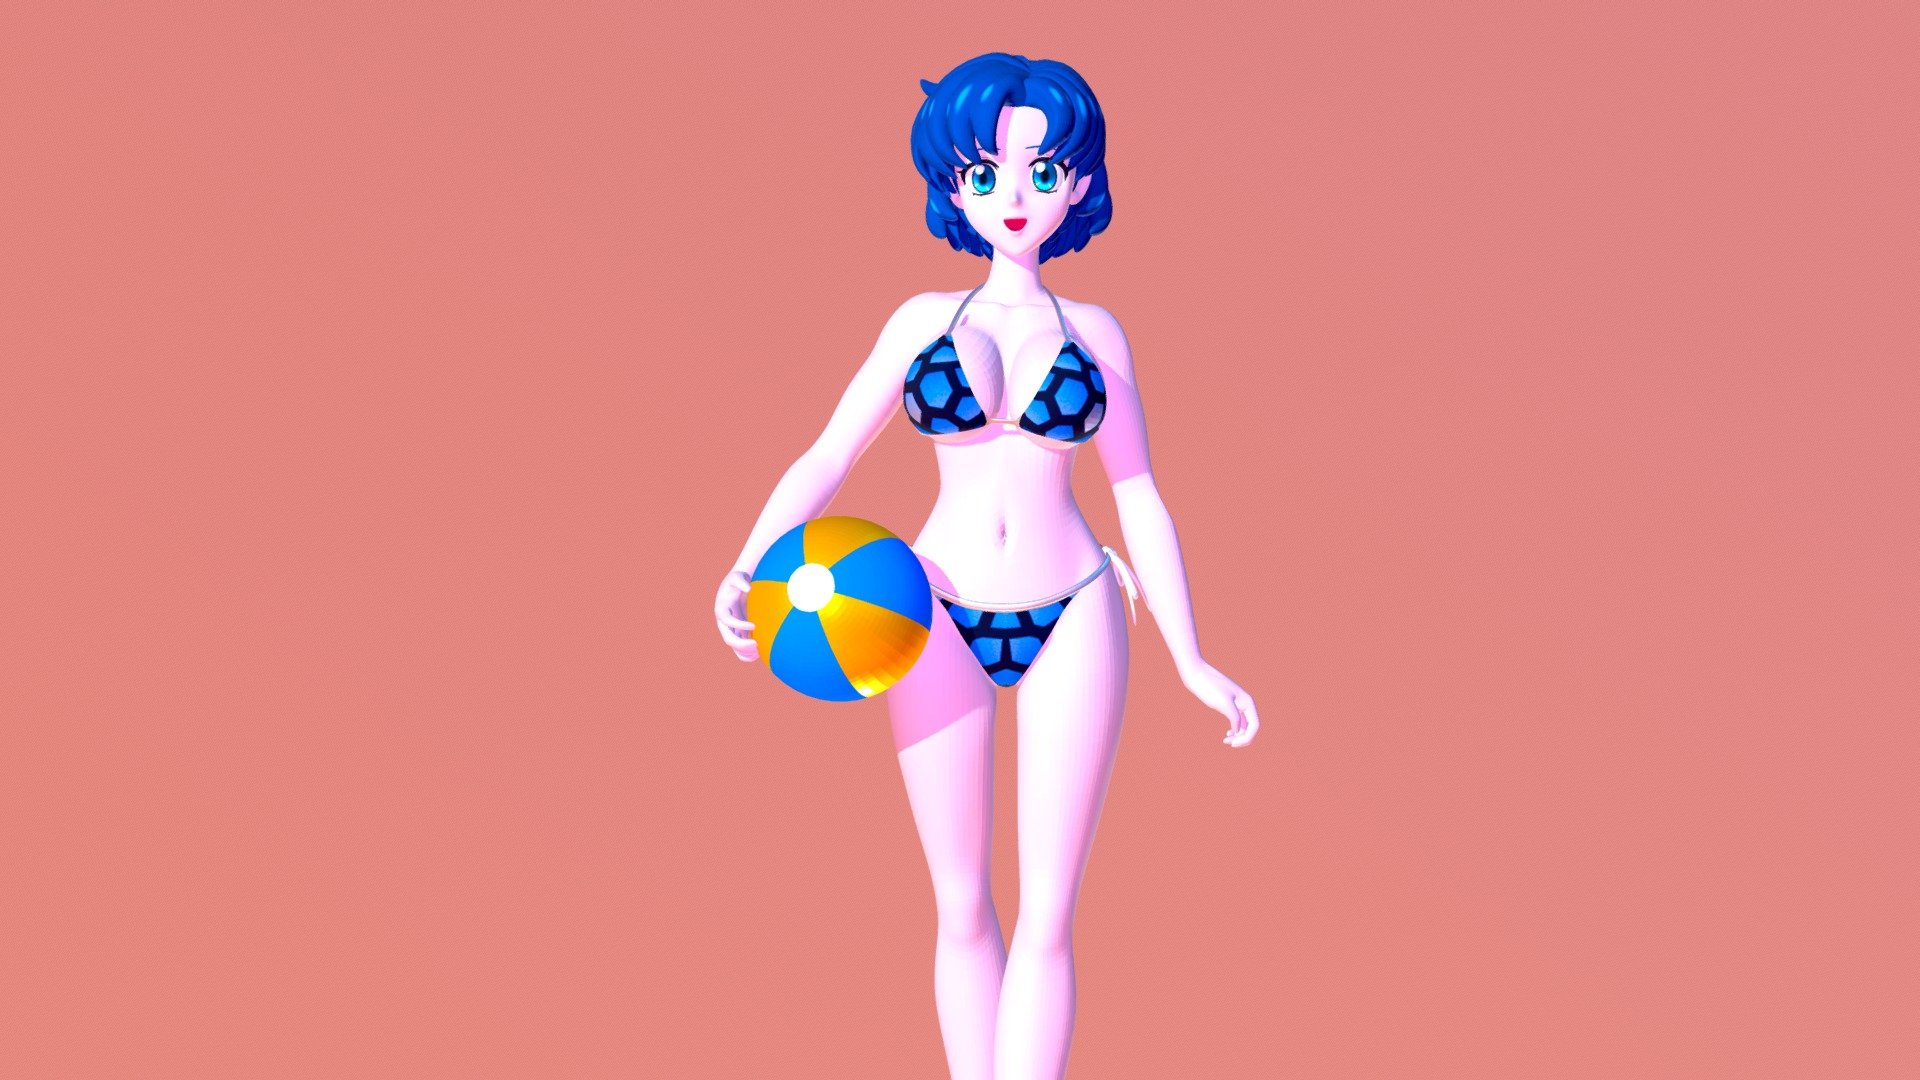 Ami in bikini.

Figured I would add more outfits to the model. There are two other swimsuits added to the model, which I have updated on cgtrader and 3dexport 3d model